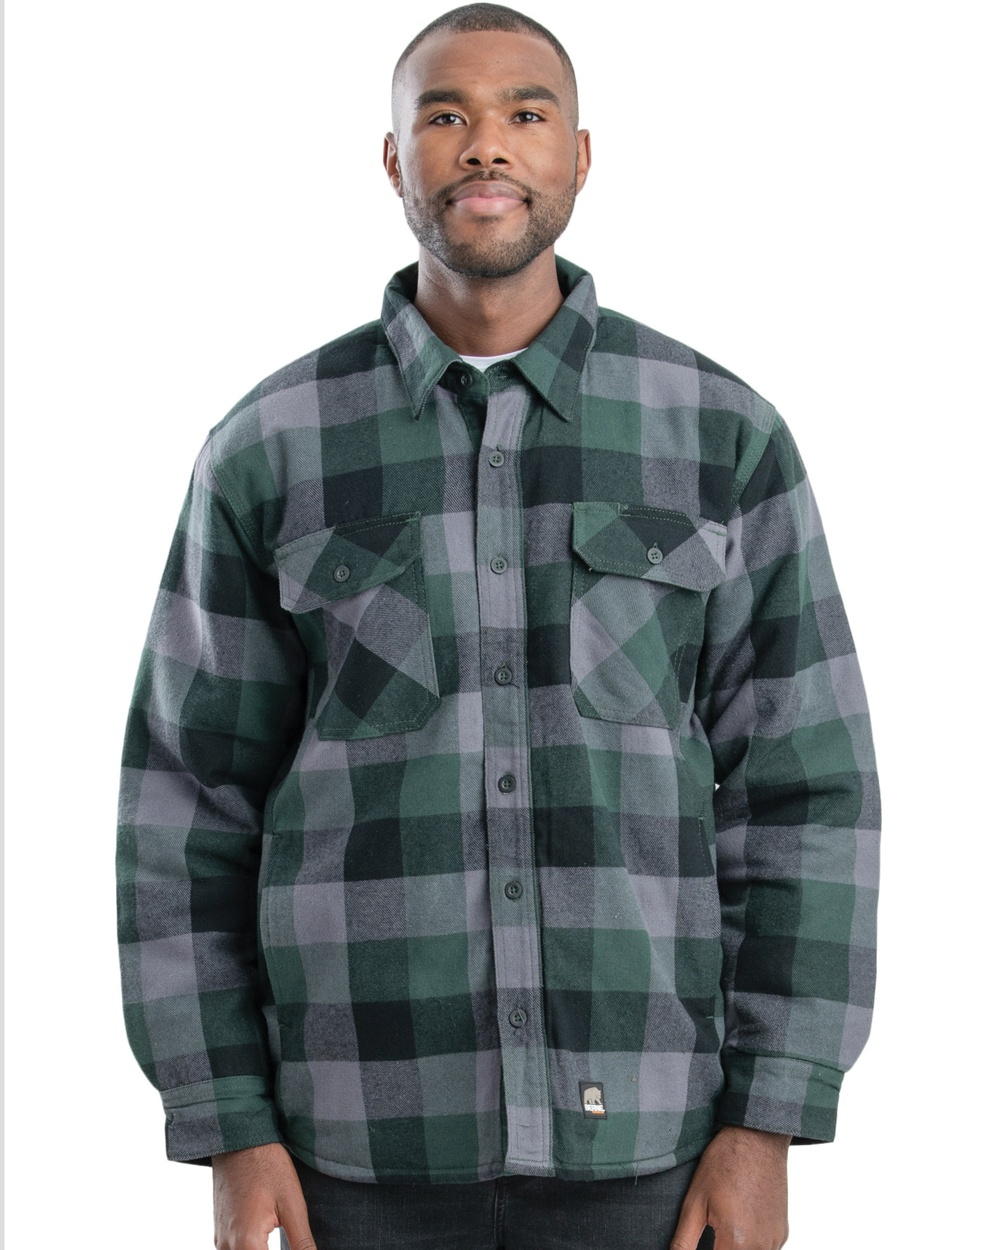 BW444 - Timber Flannel Shirt Jacket - One Stop